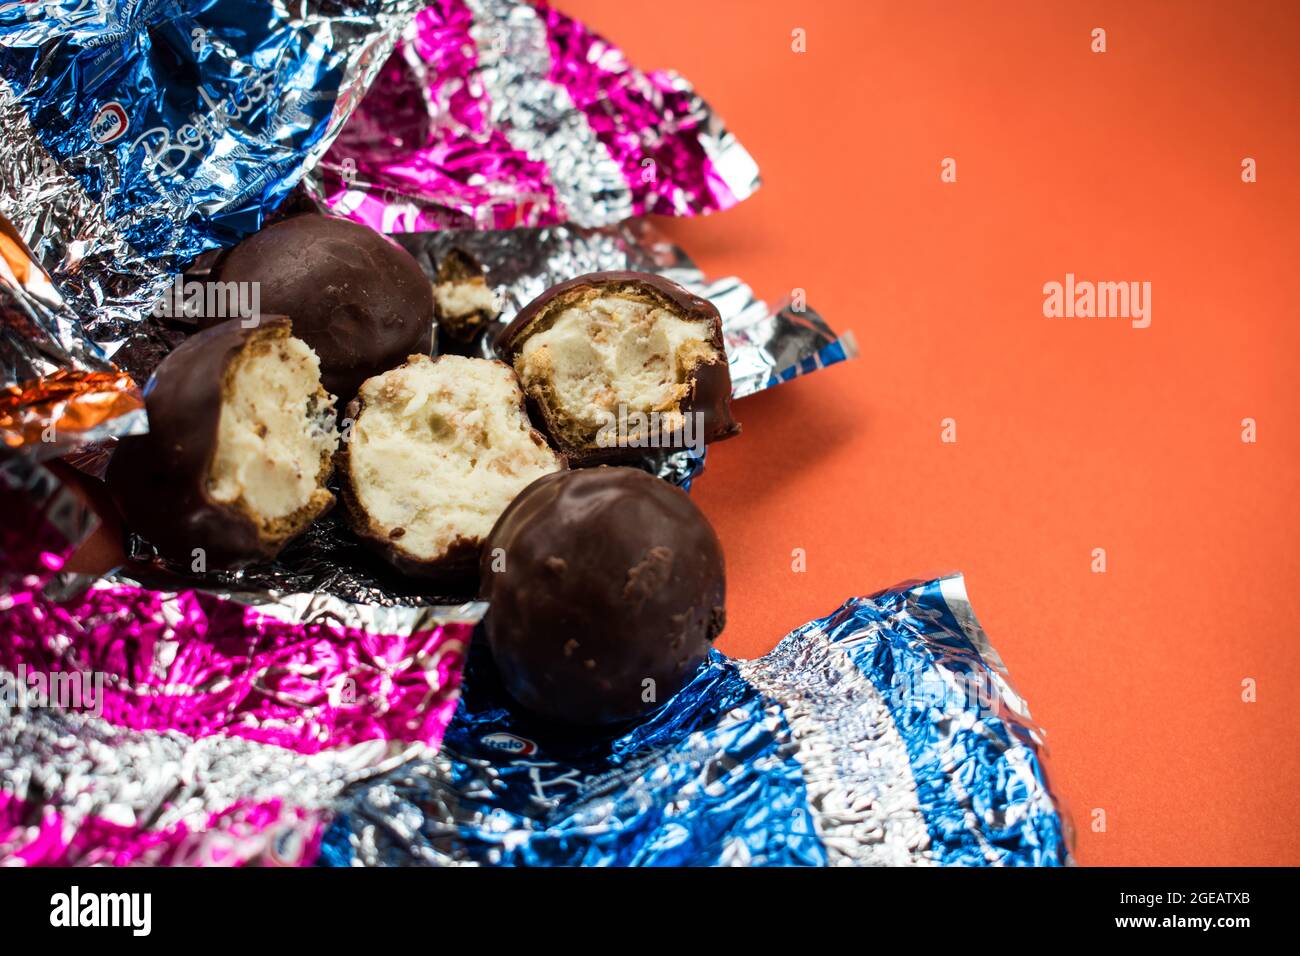 Some chocolates and some different colorful wrappers on orange surface Stock Photo